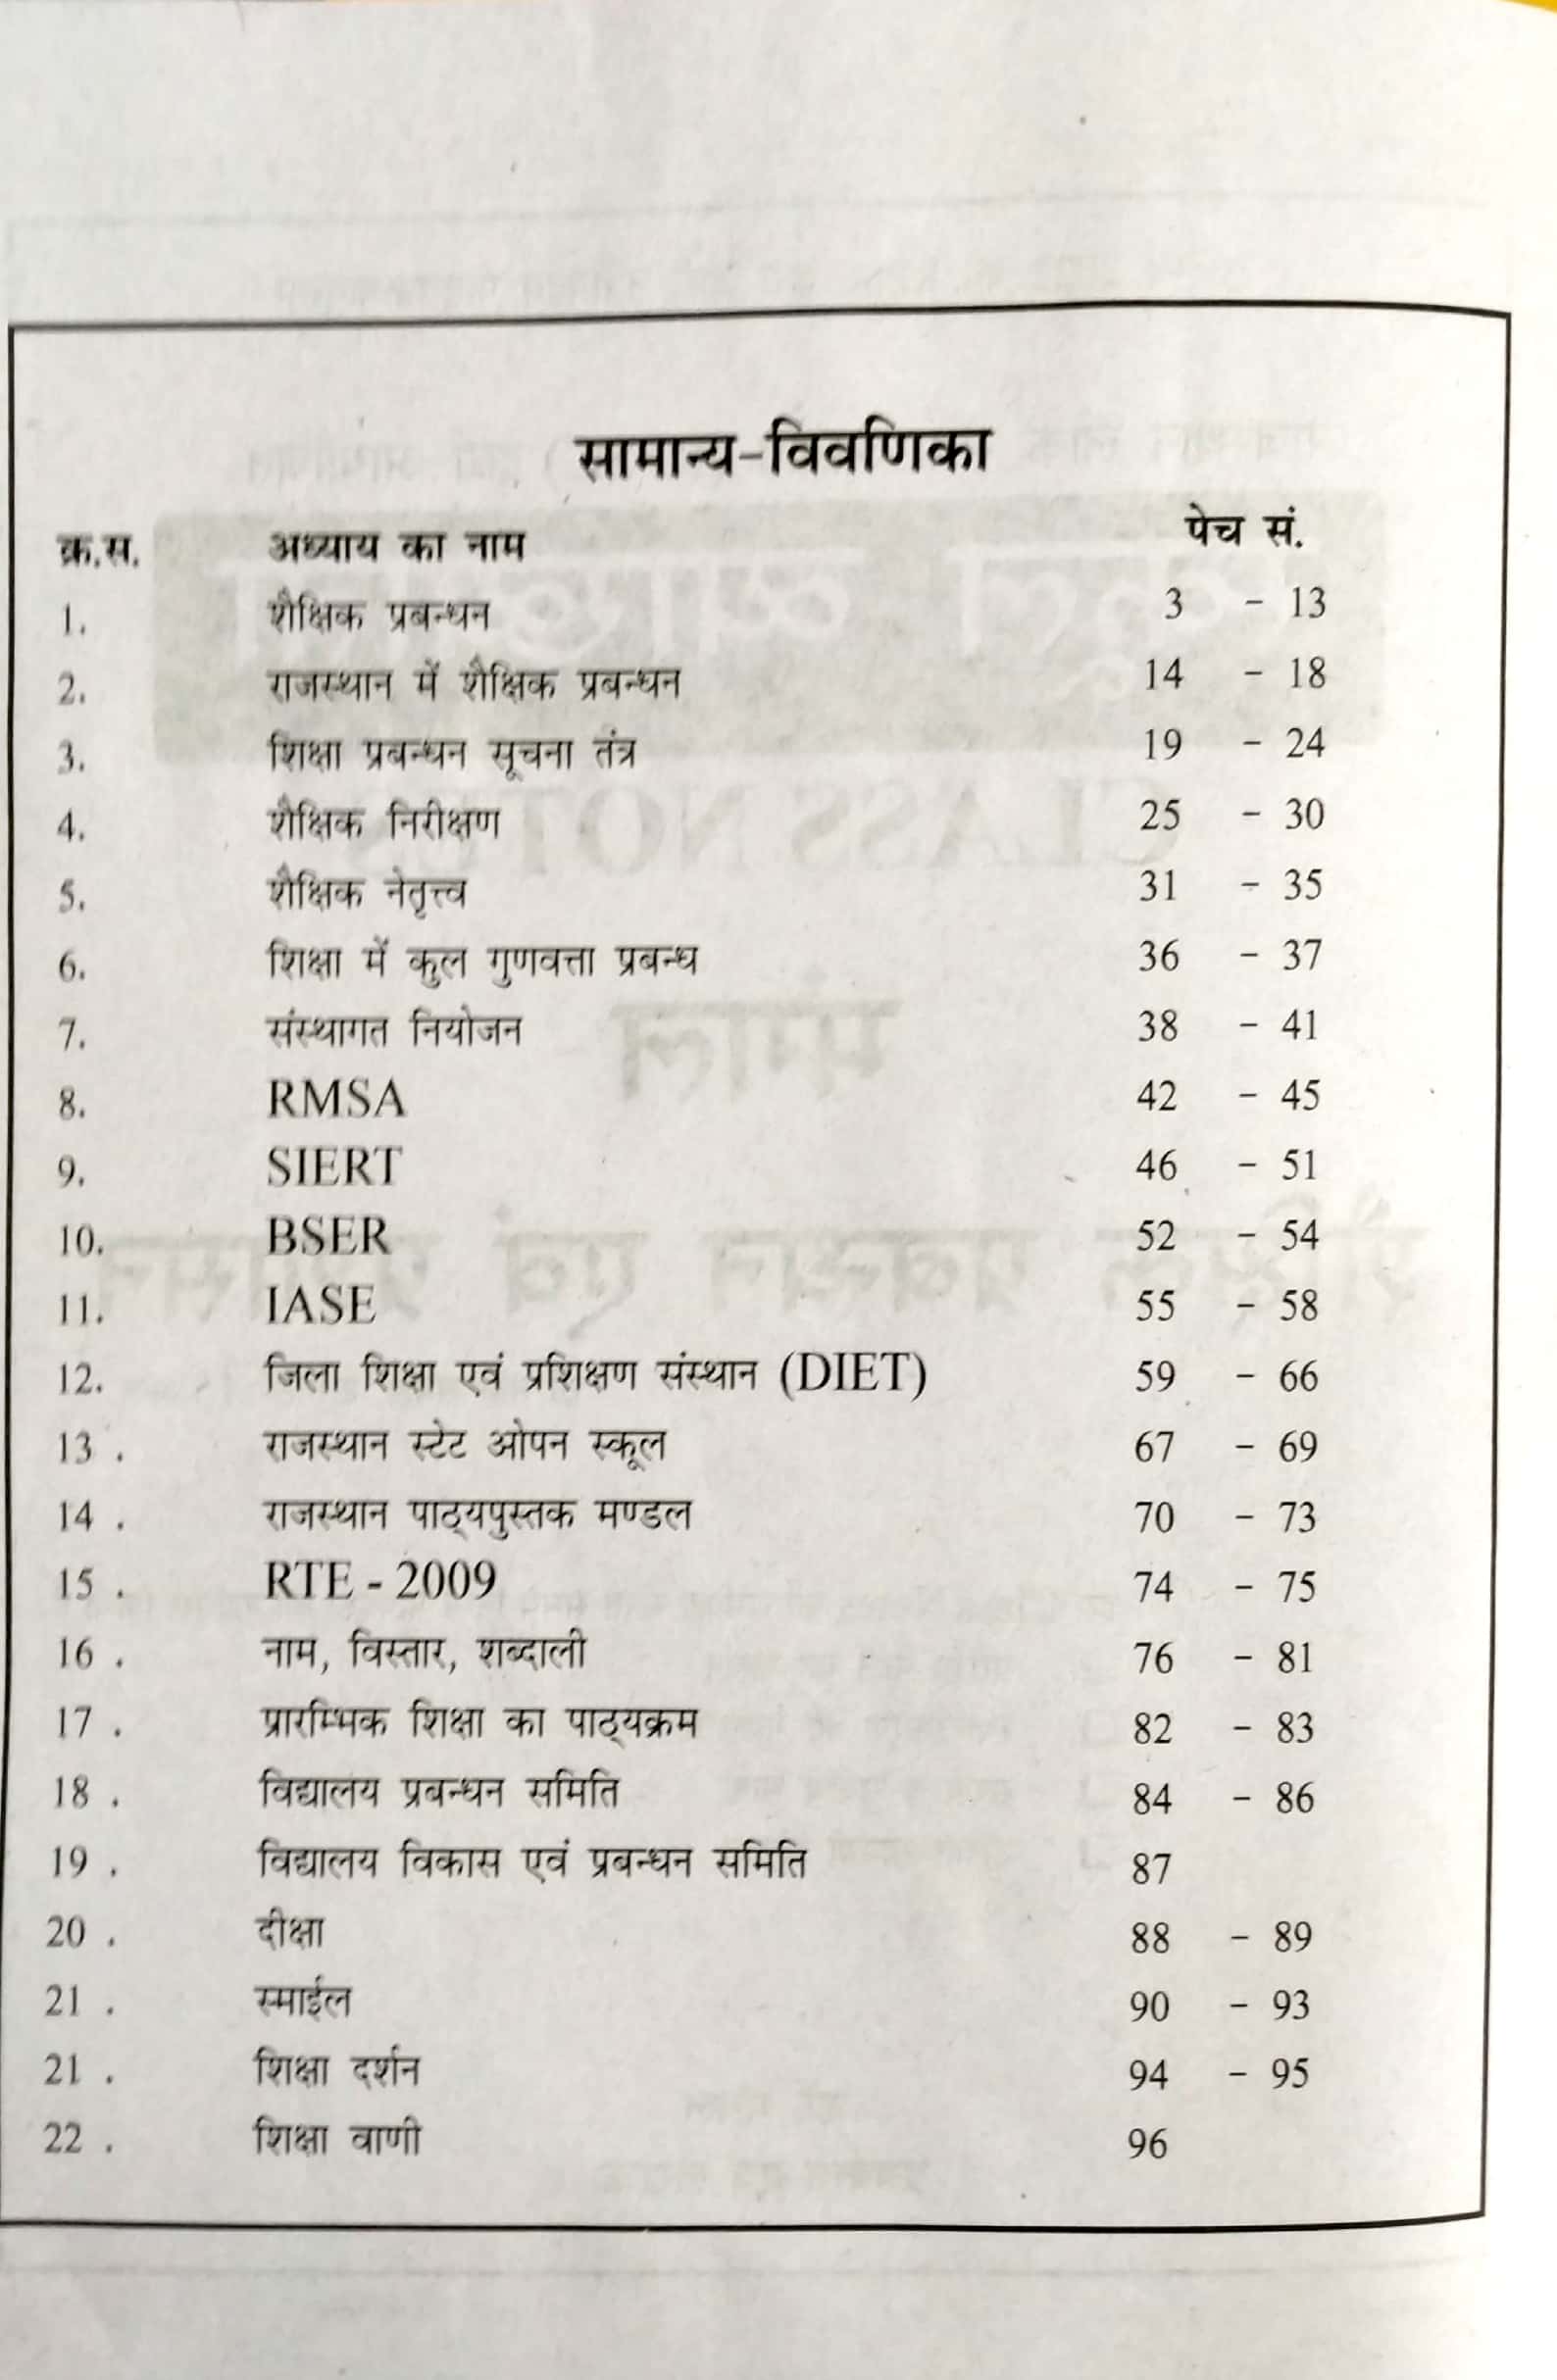 Mangal First Grade Education Management And Administration (Shaikshik Prabandhan Evam Prashasan) Class Notes By Dr. Mangal For RPSC 1st Grade School Lecturer Examination Latest Edition